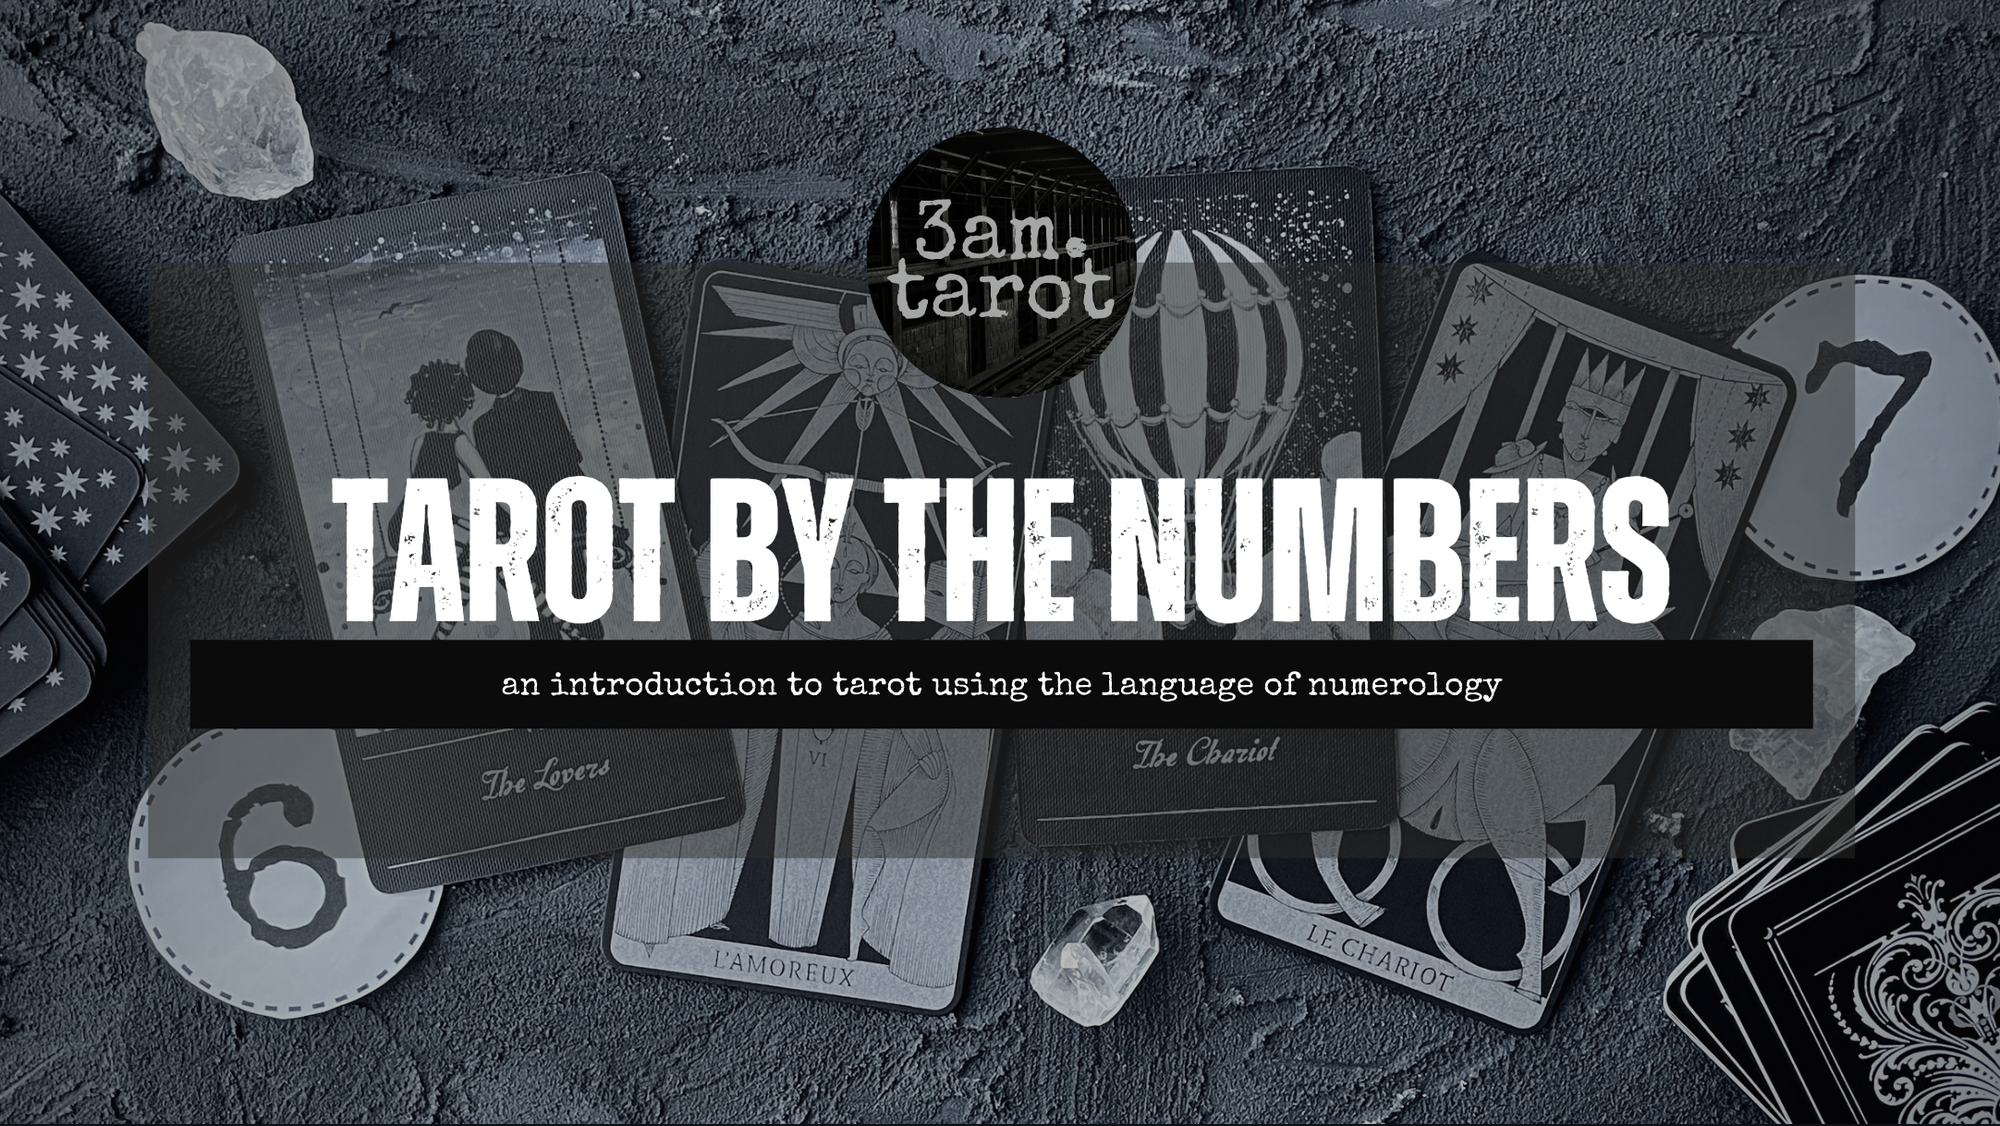 tarot by the numbers: an introduction to tarot using the language of numerology